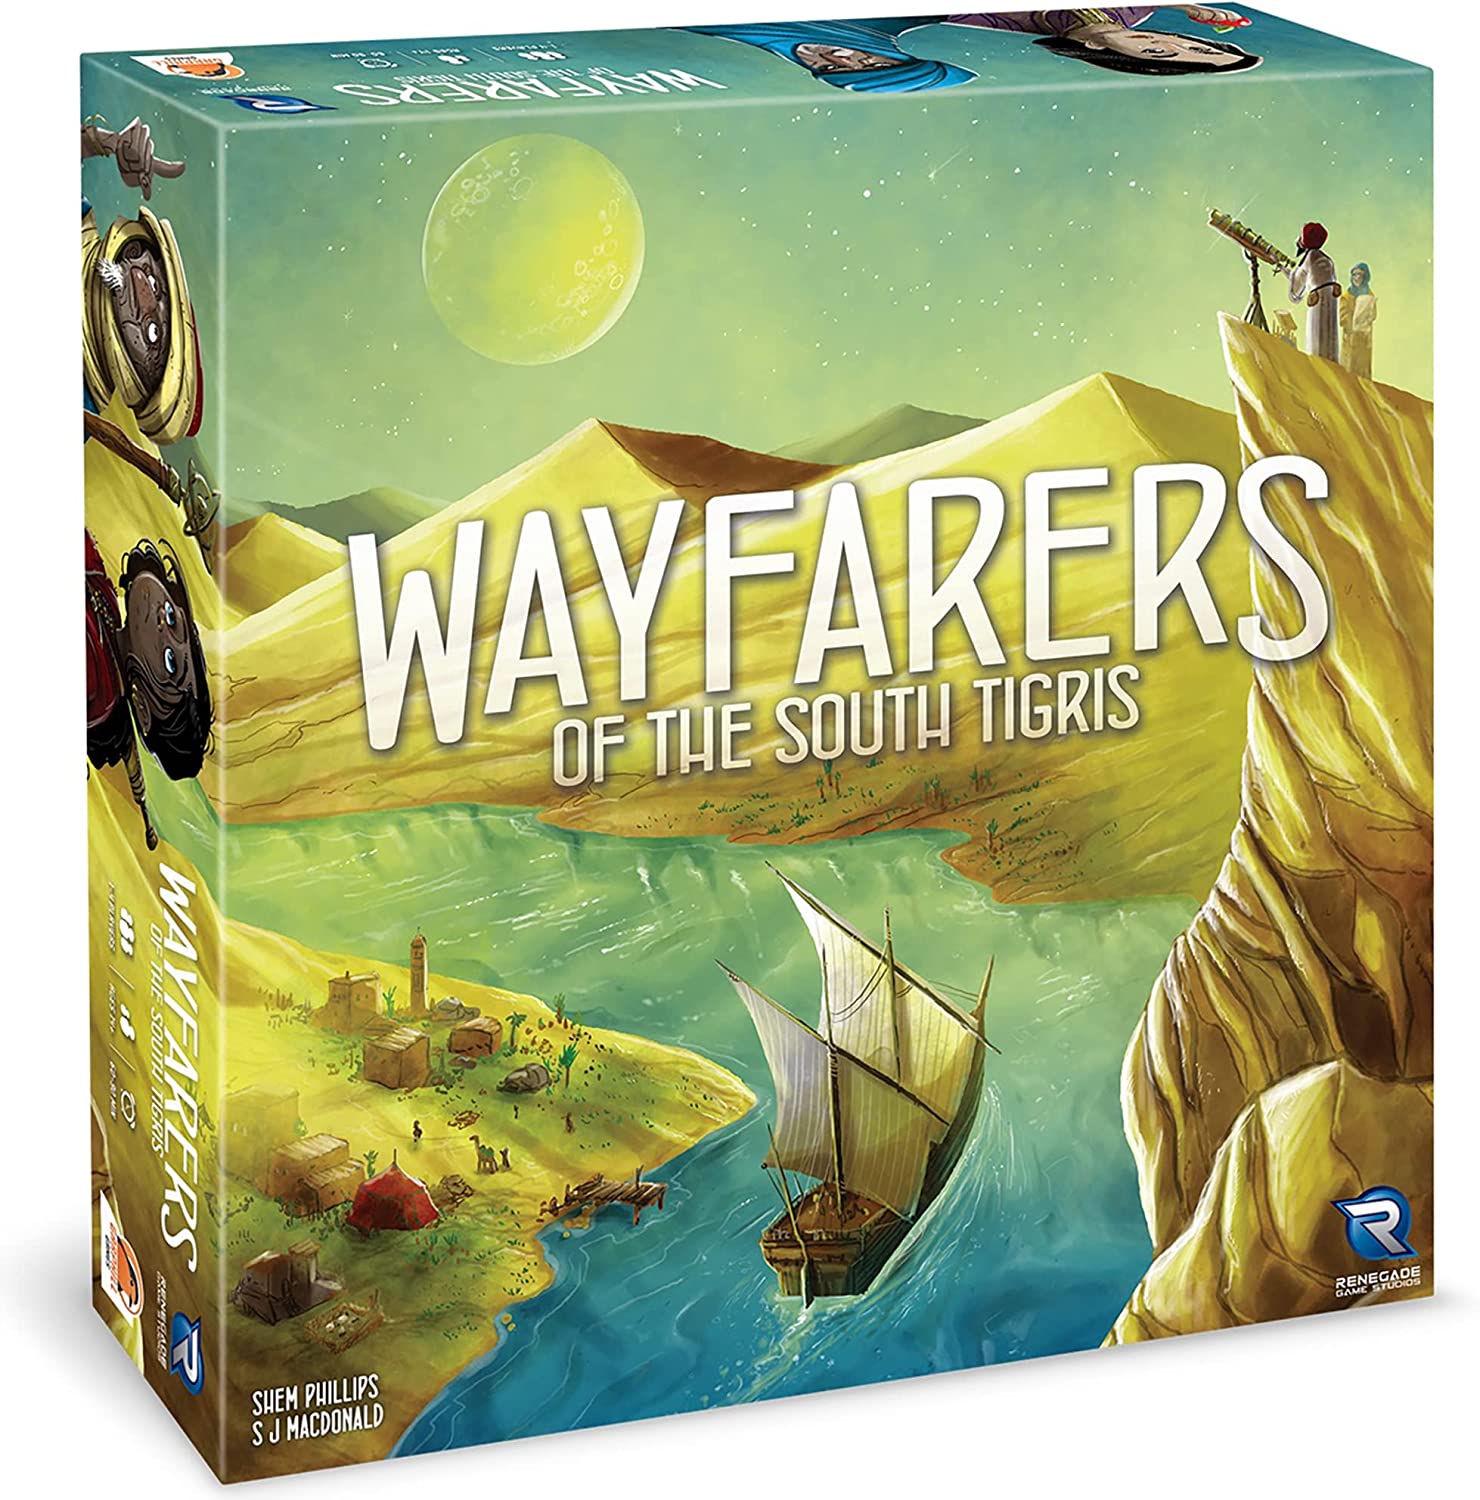 Wayfarers of the South Tigris - Gaming Library